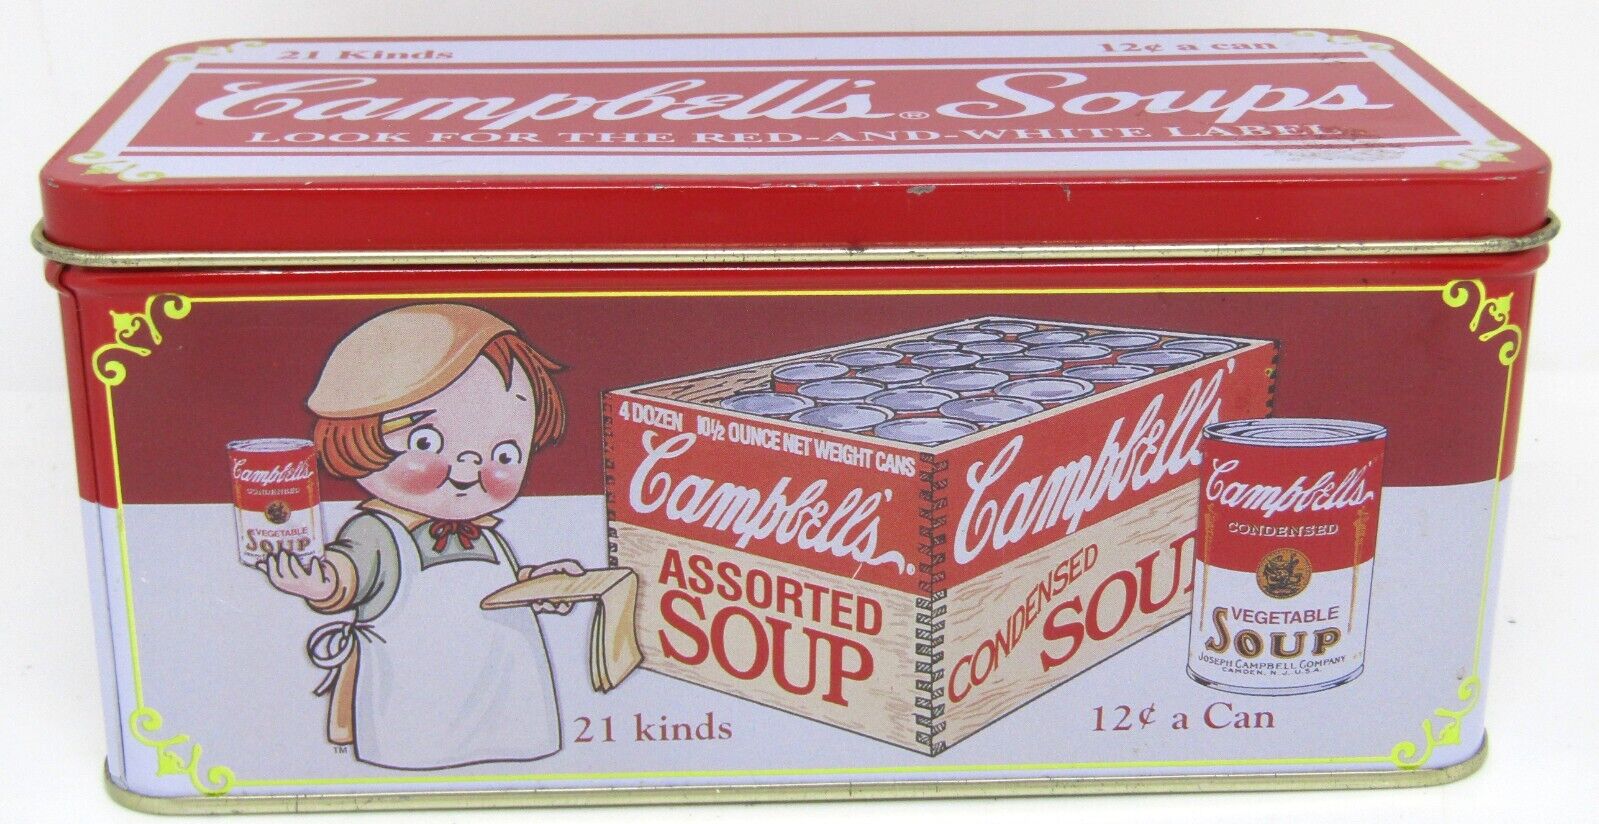 Collectors Vintage Campbell’s Soups Metal Tin Assorted Soup 21 Kinds 12¢ A Can